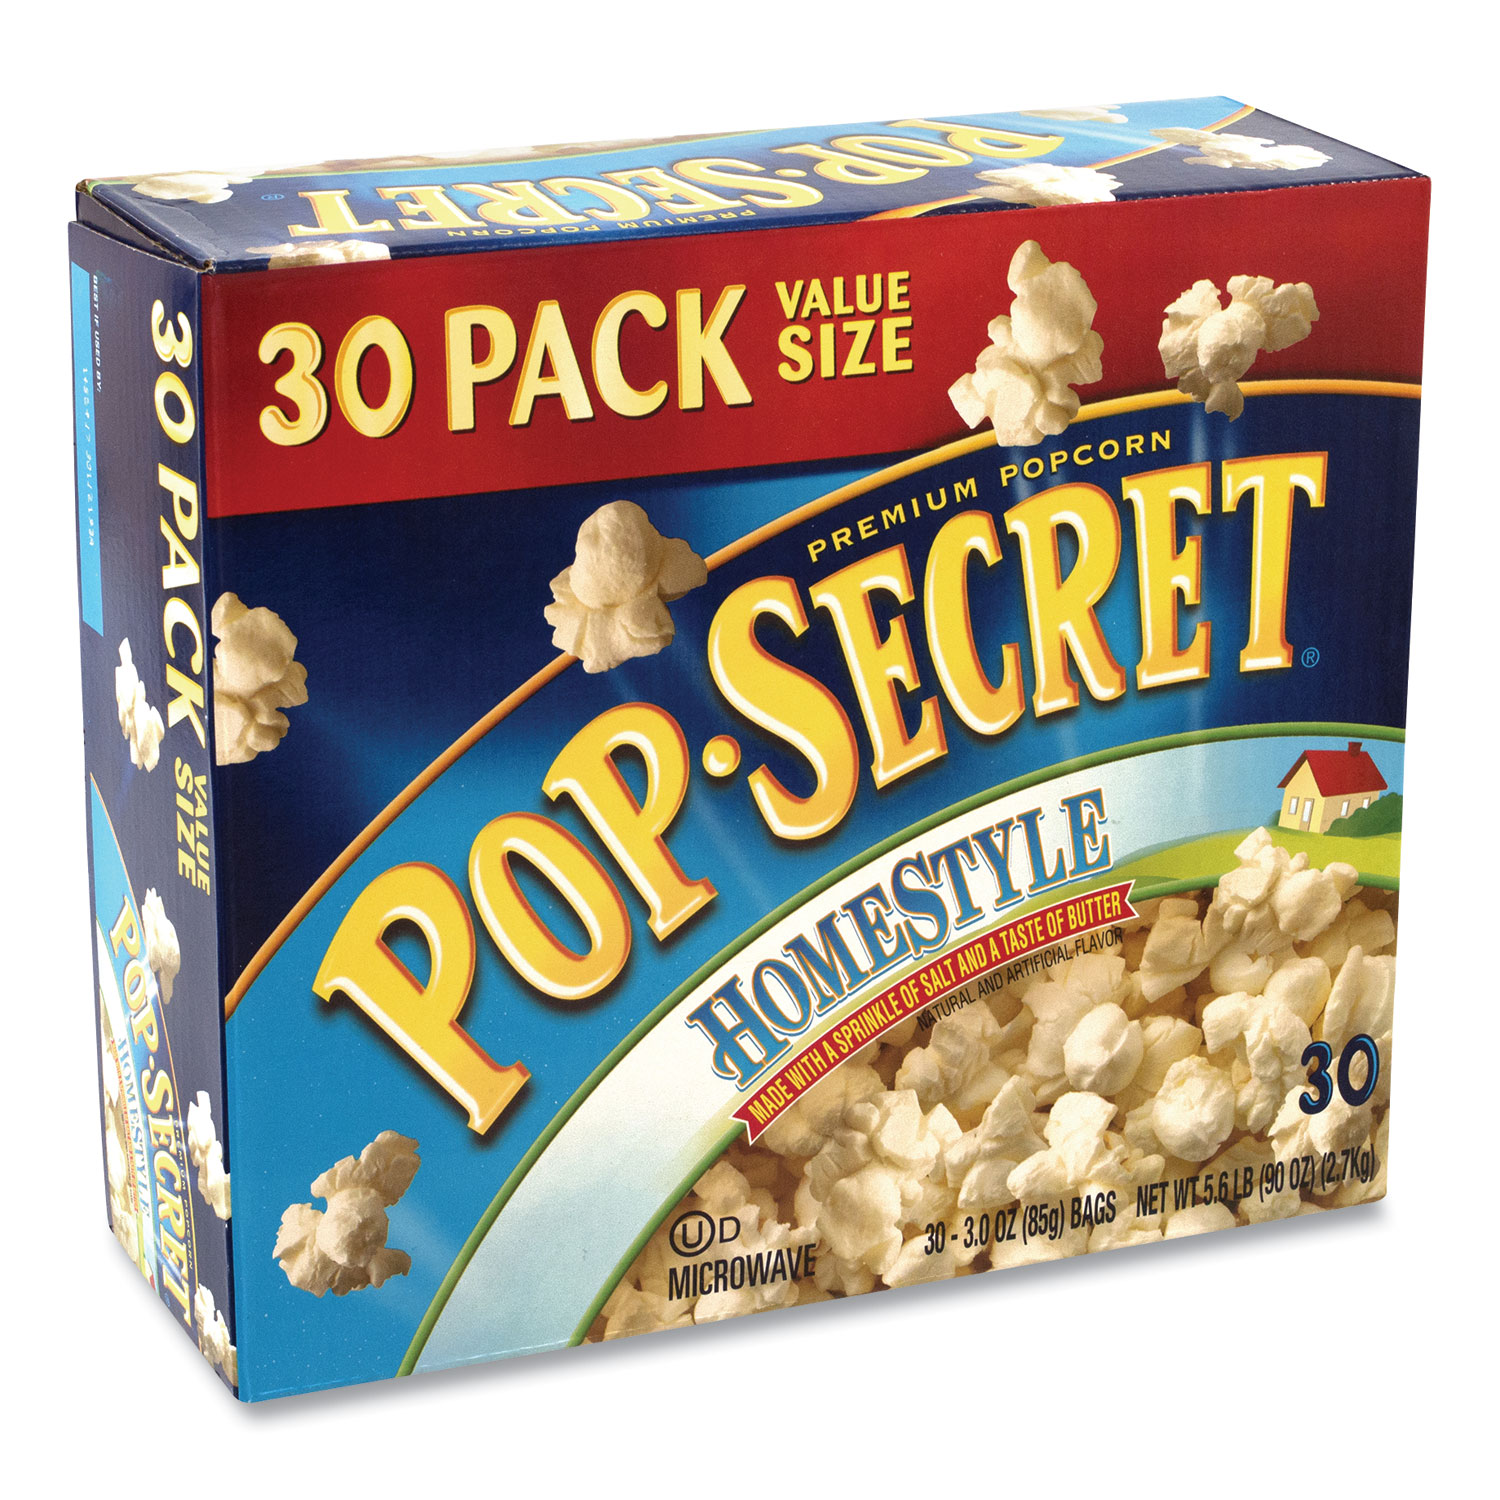  Pop Secret 69687 Microwave Popcorn, Homestyle, 3 oz Bags, 30/Carton, Free Delivery in 1-4 Business Days (GRR22000634) 